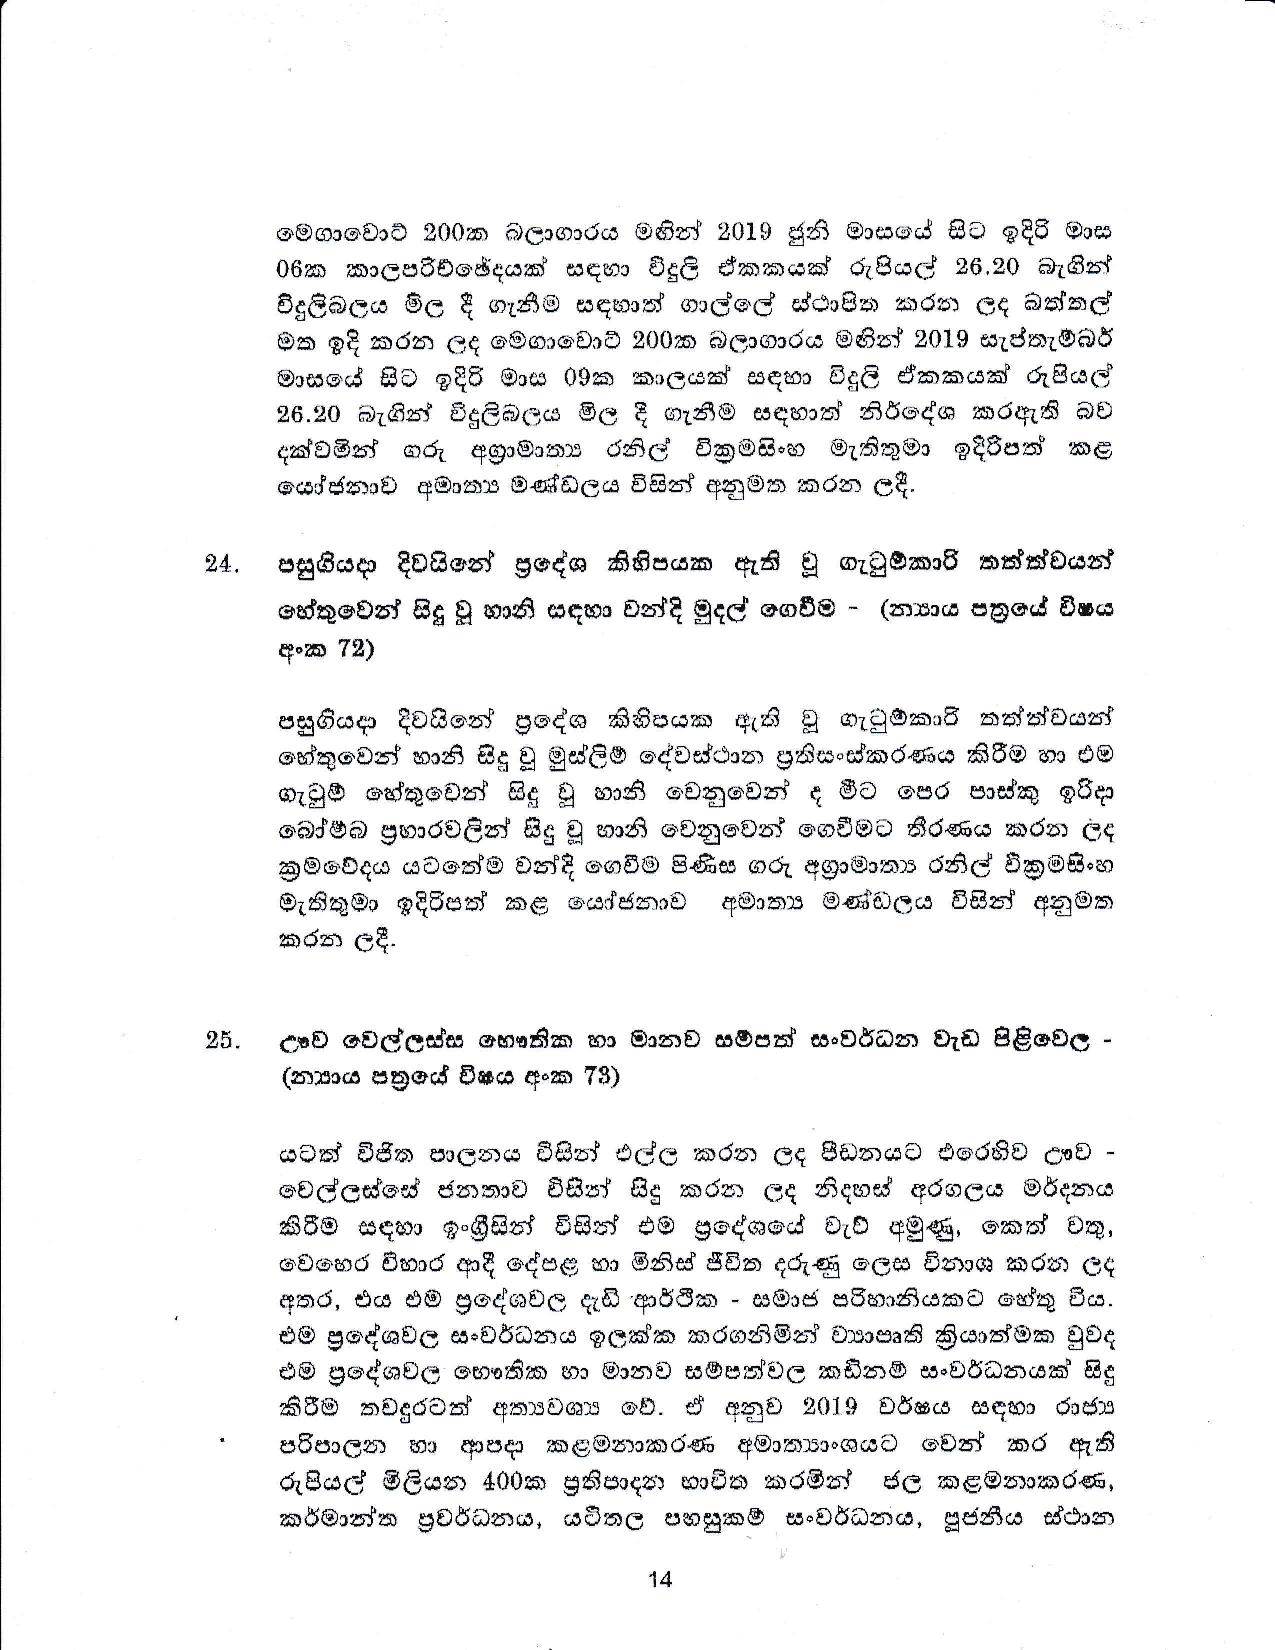 Cabinet Decision on 21.05.2019 page 014